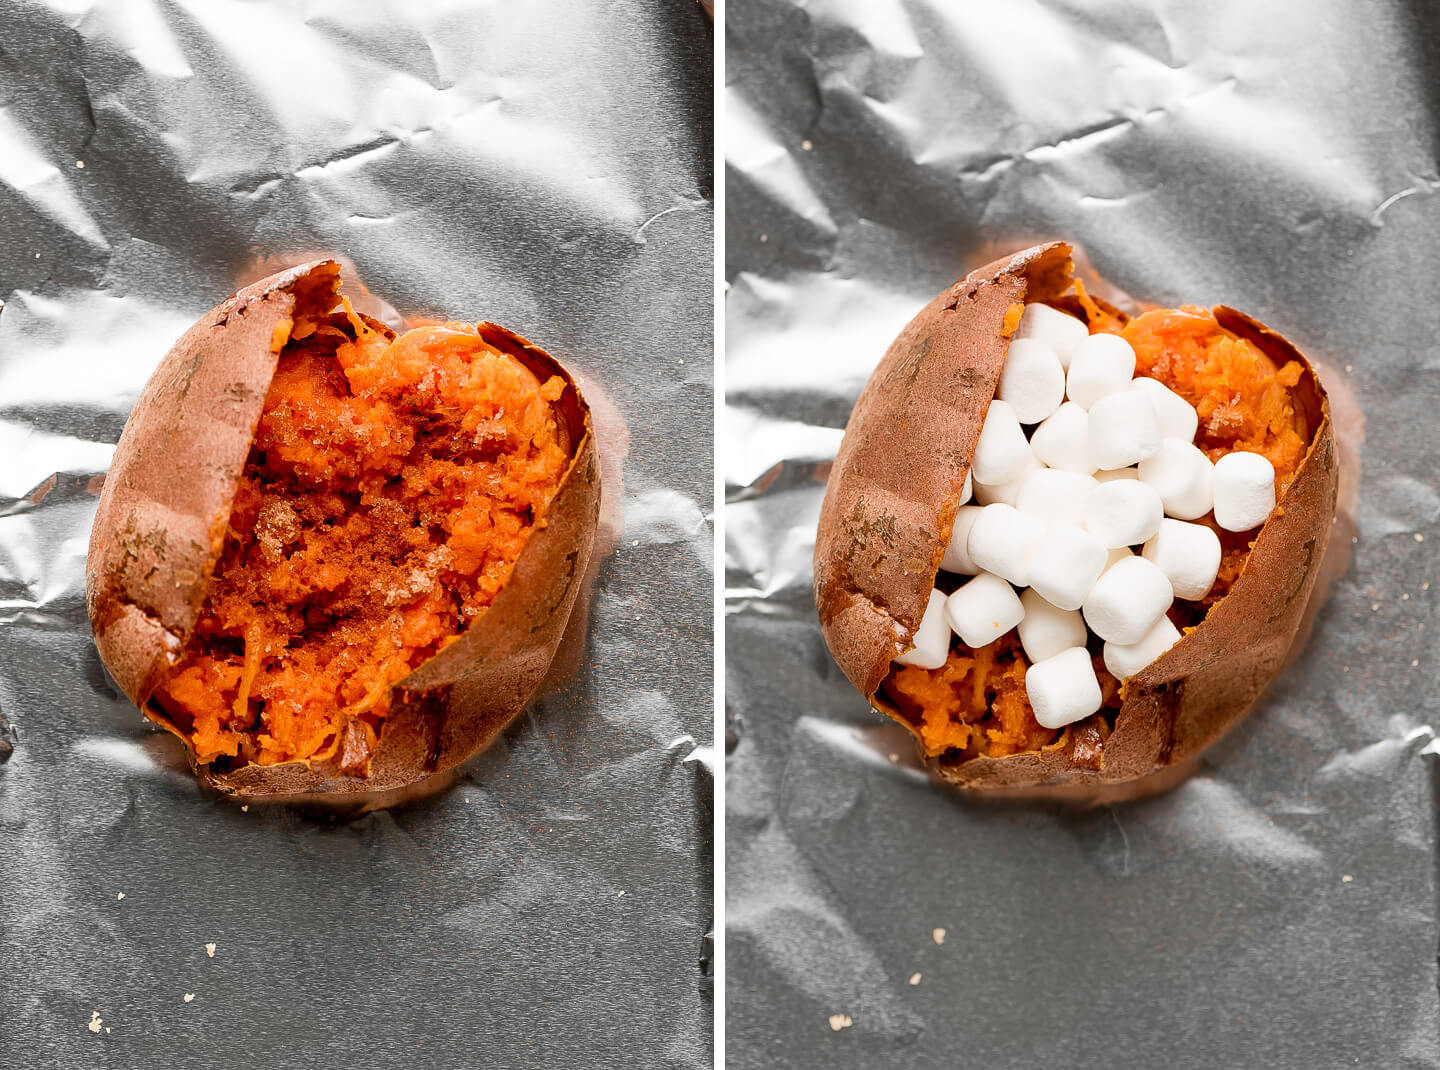 Diptych- Baked sweet potato with cinnamon and sugar; topped with marshmallows.